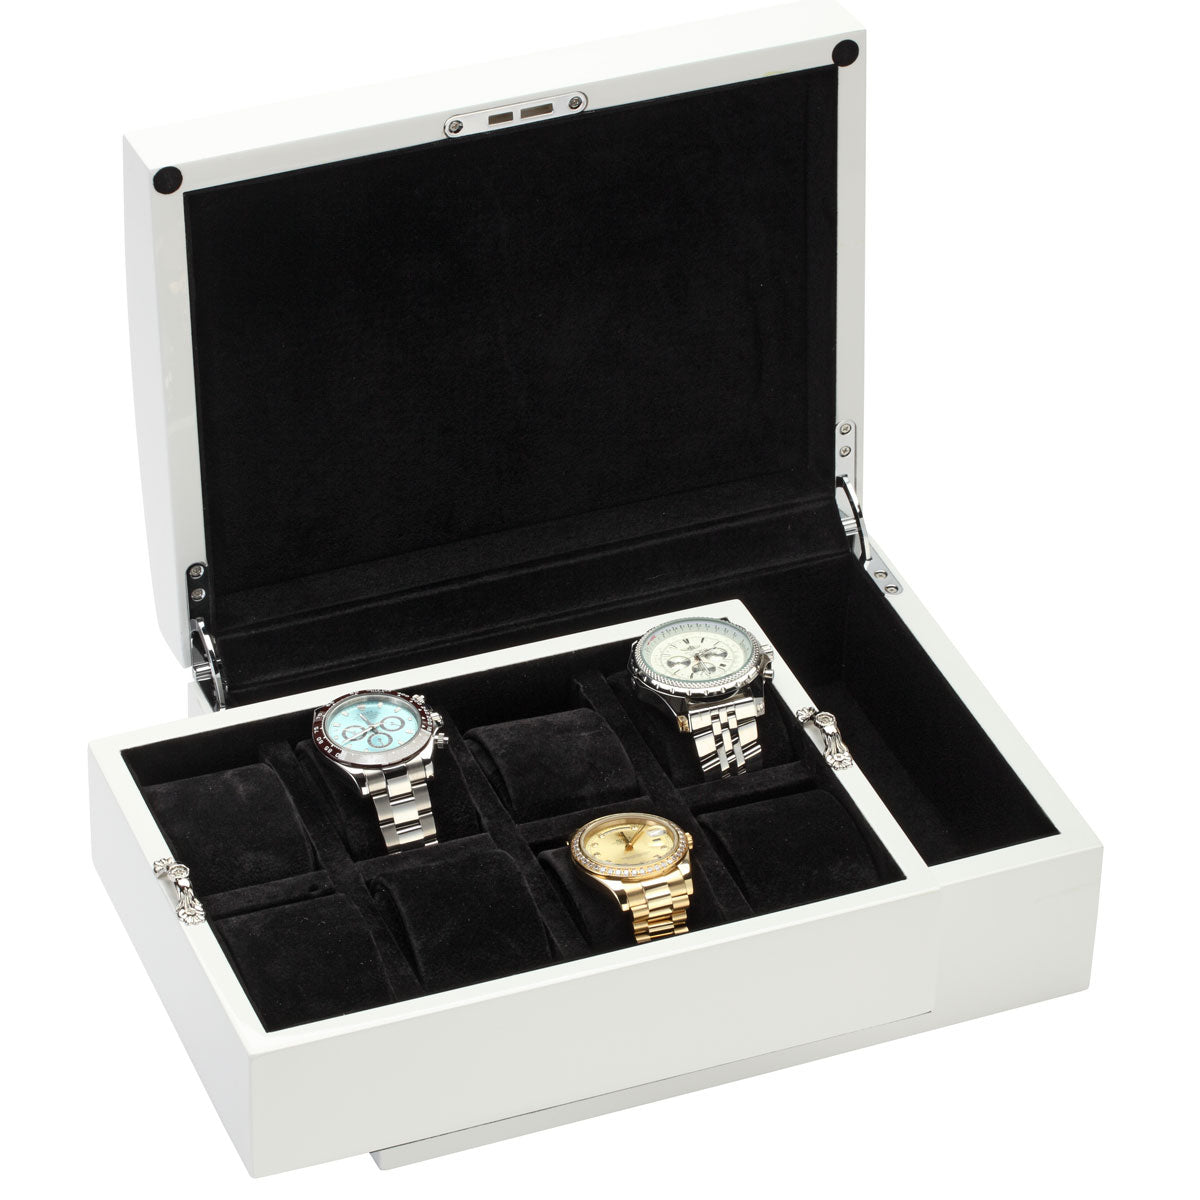 Diplomat "Prestige" 8-Watch Cases w/Removable Inner Tray